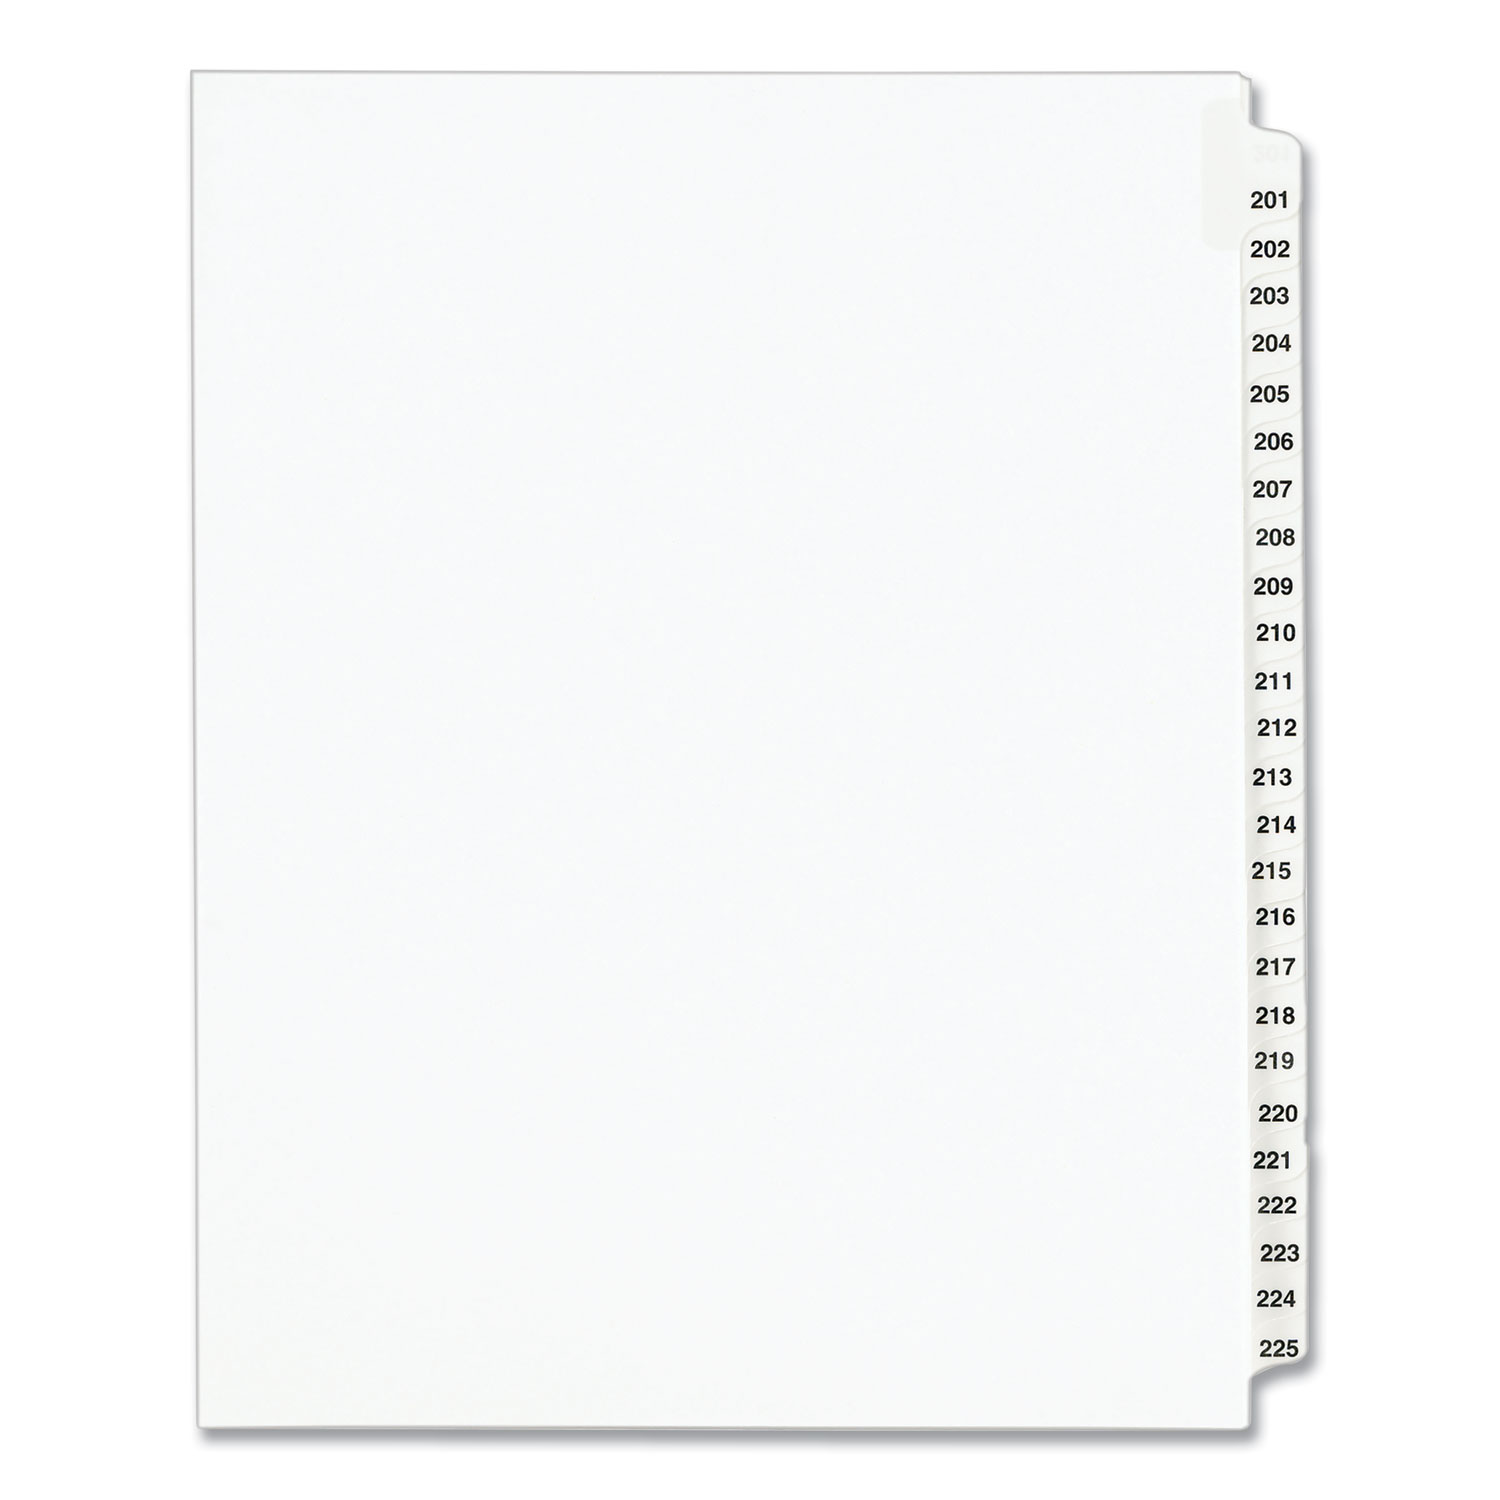 Y 01425 Premium Individual Tab Titles Pack of 25 Letter Size Avery Legal Dividers Side Tabs 